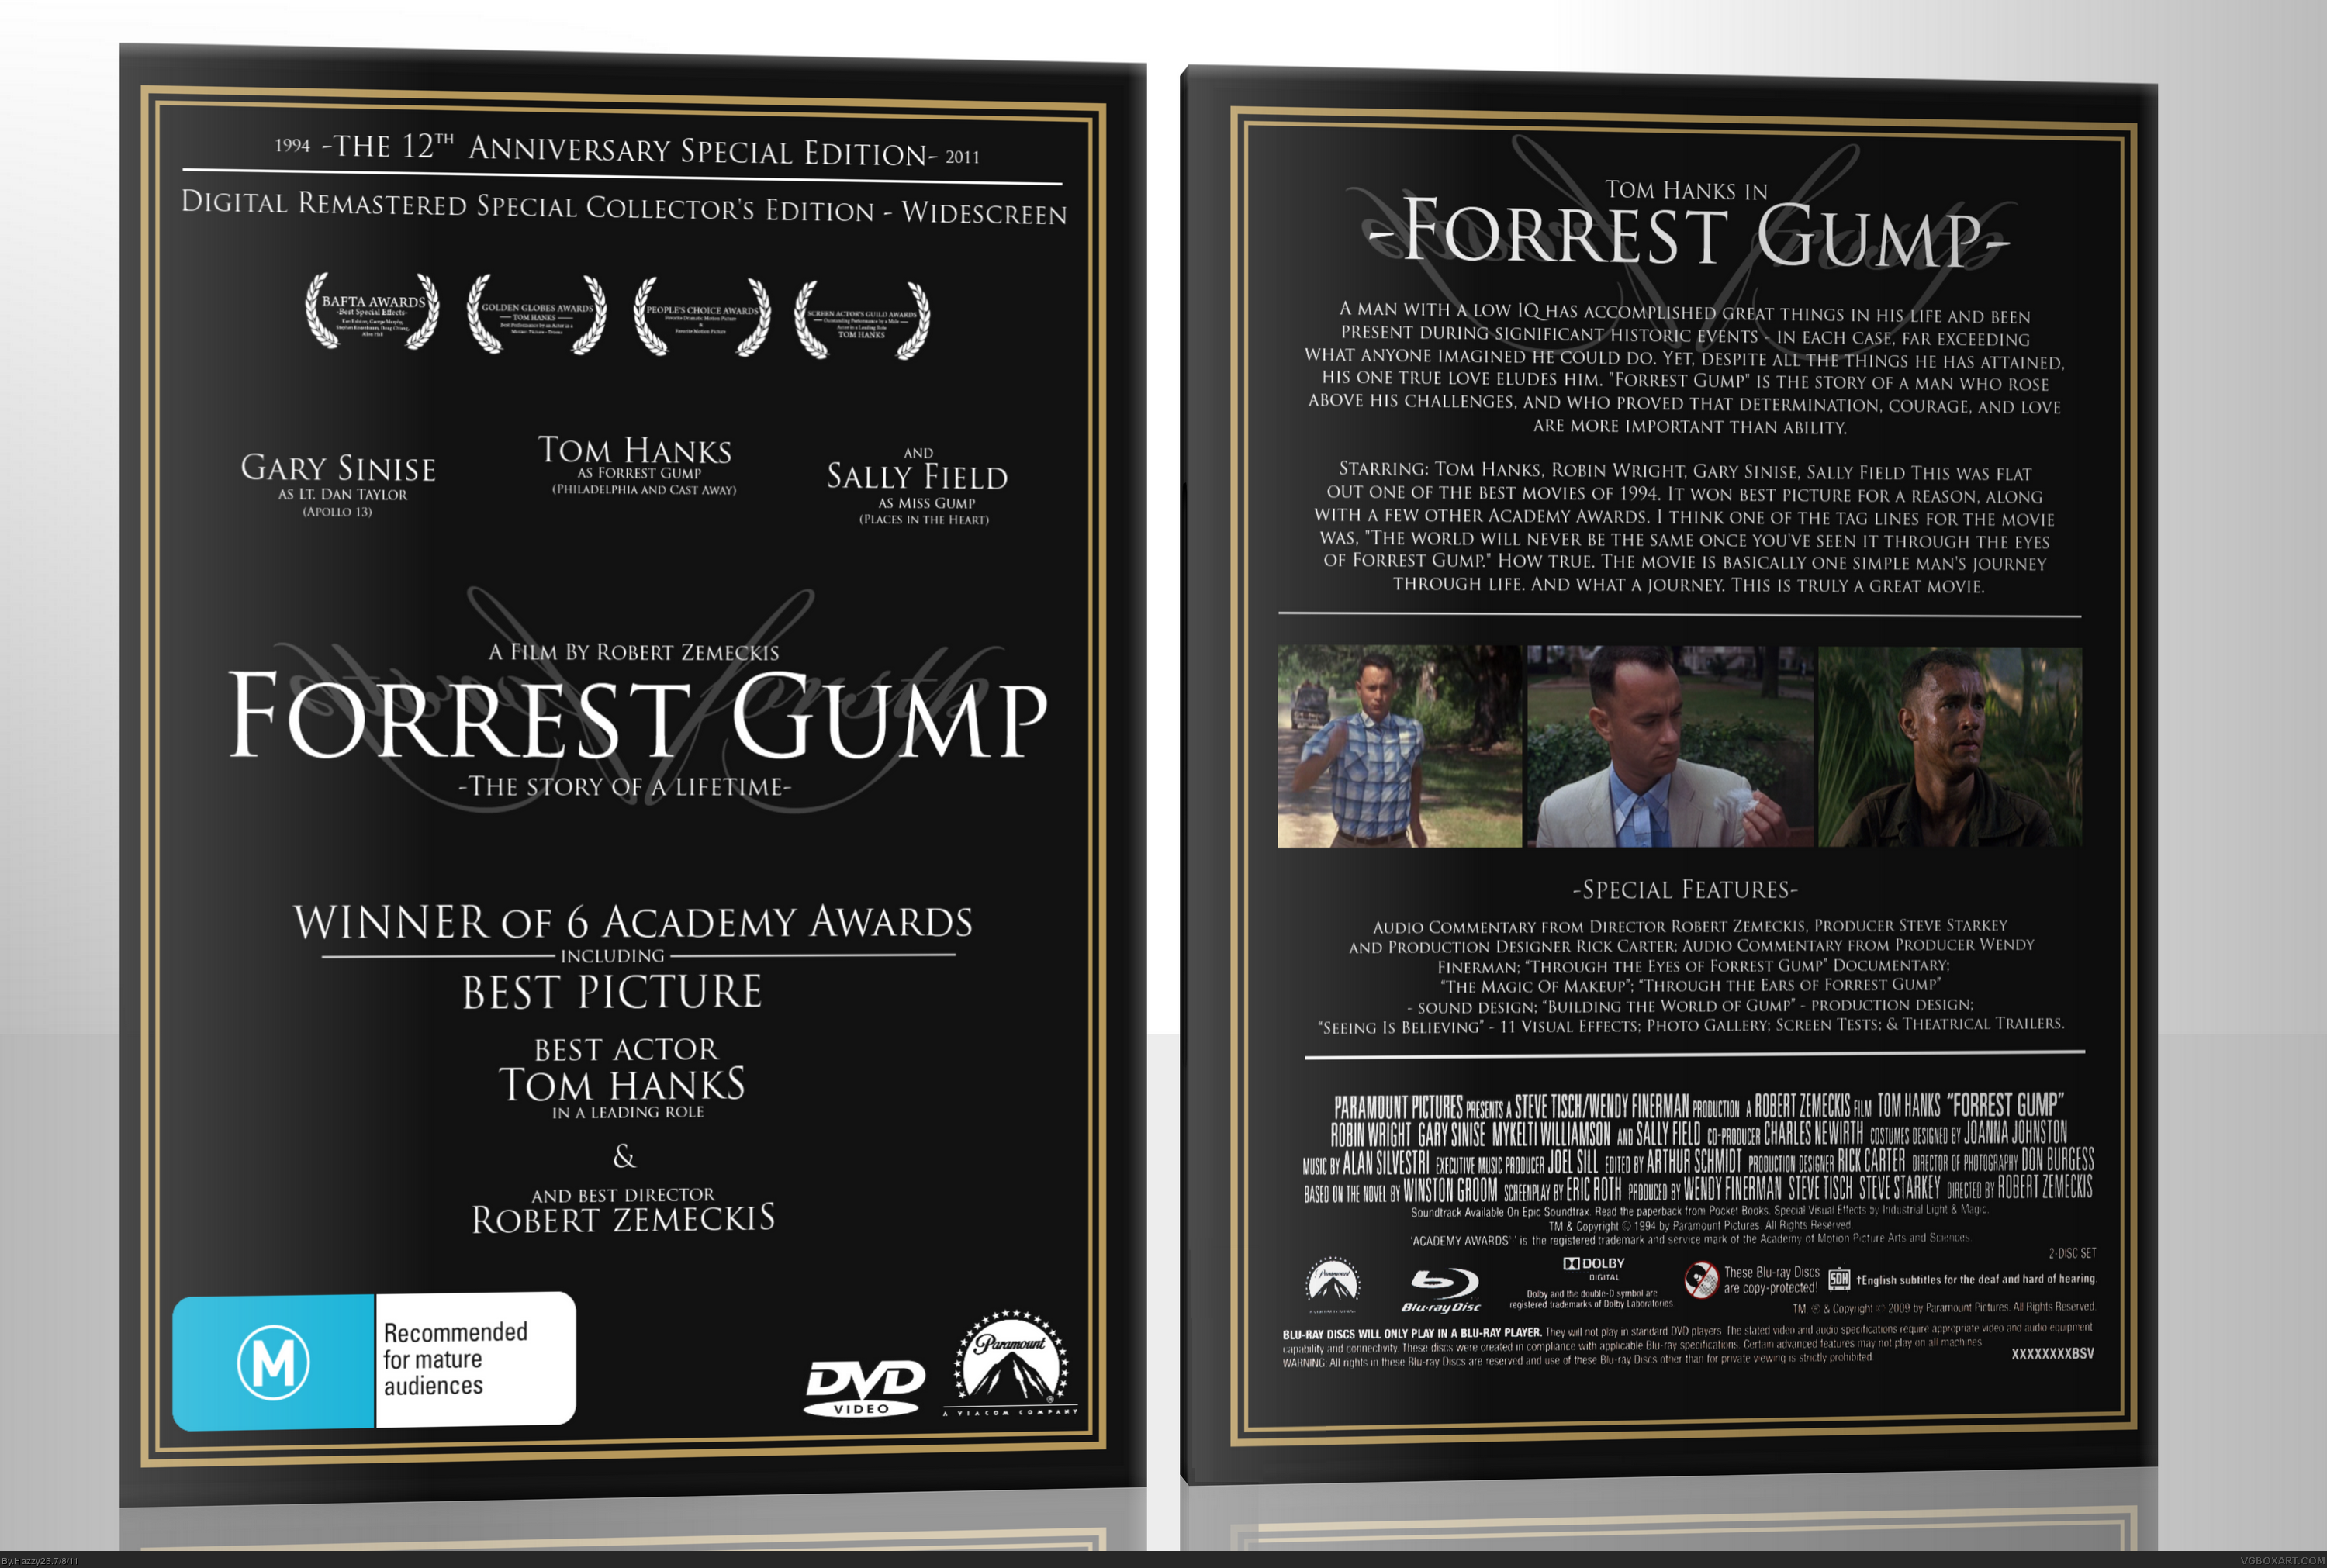 Forrest Gump box cover